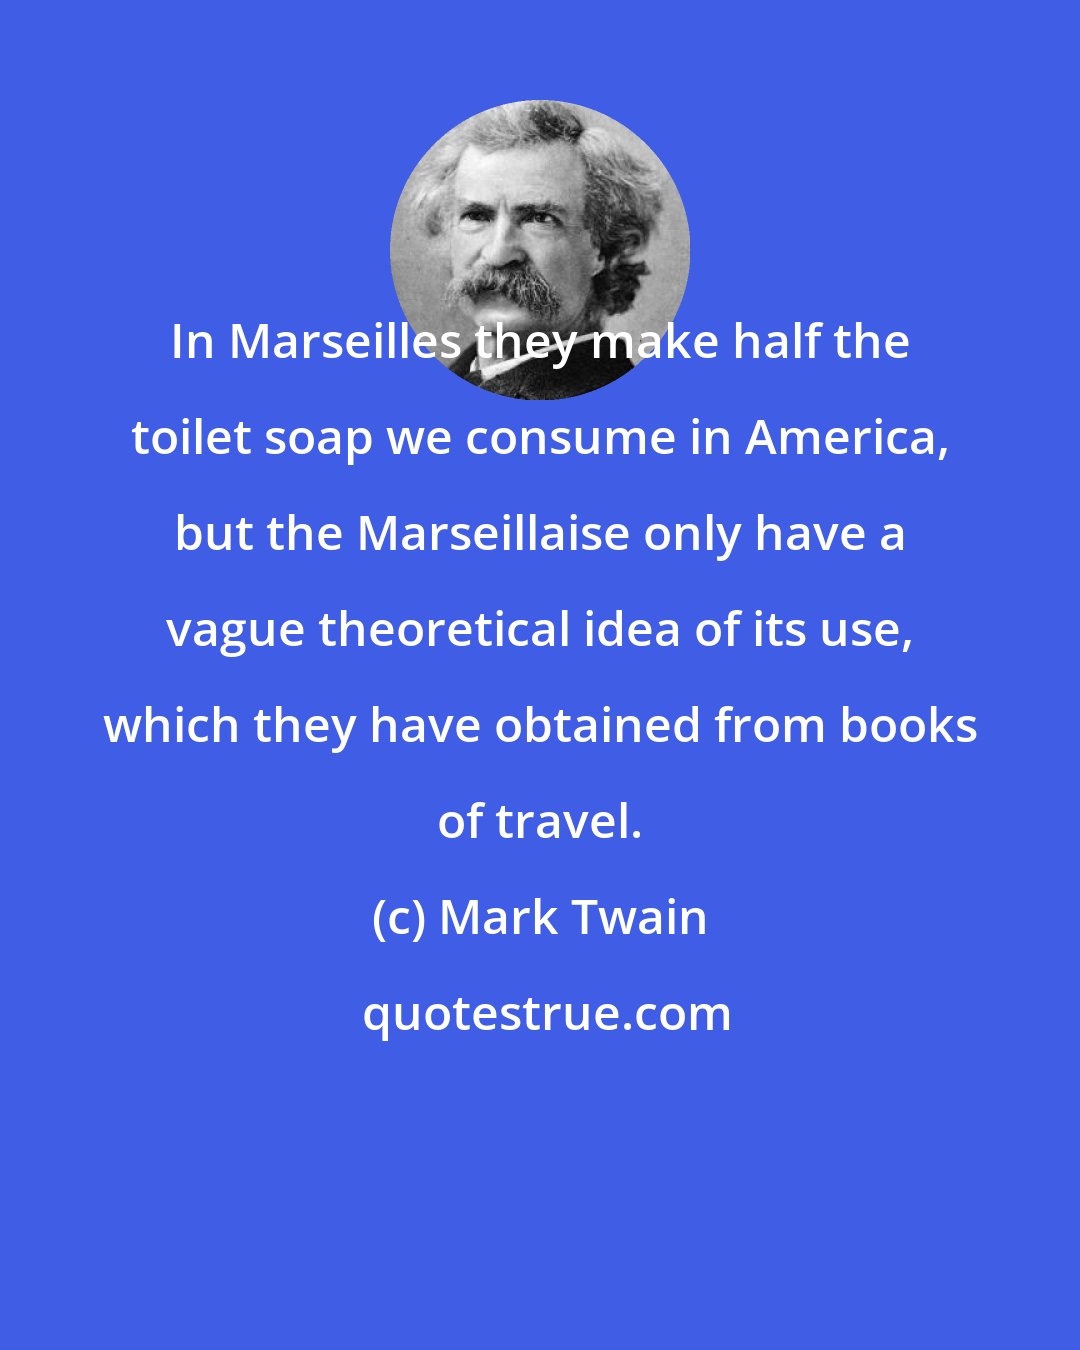 Mark Twain: In Marseilles they make half the toilet soap we consume in America, but the Marseillaise only have a vague theoretical idea of its use, which they have obtained from books of travel.